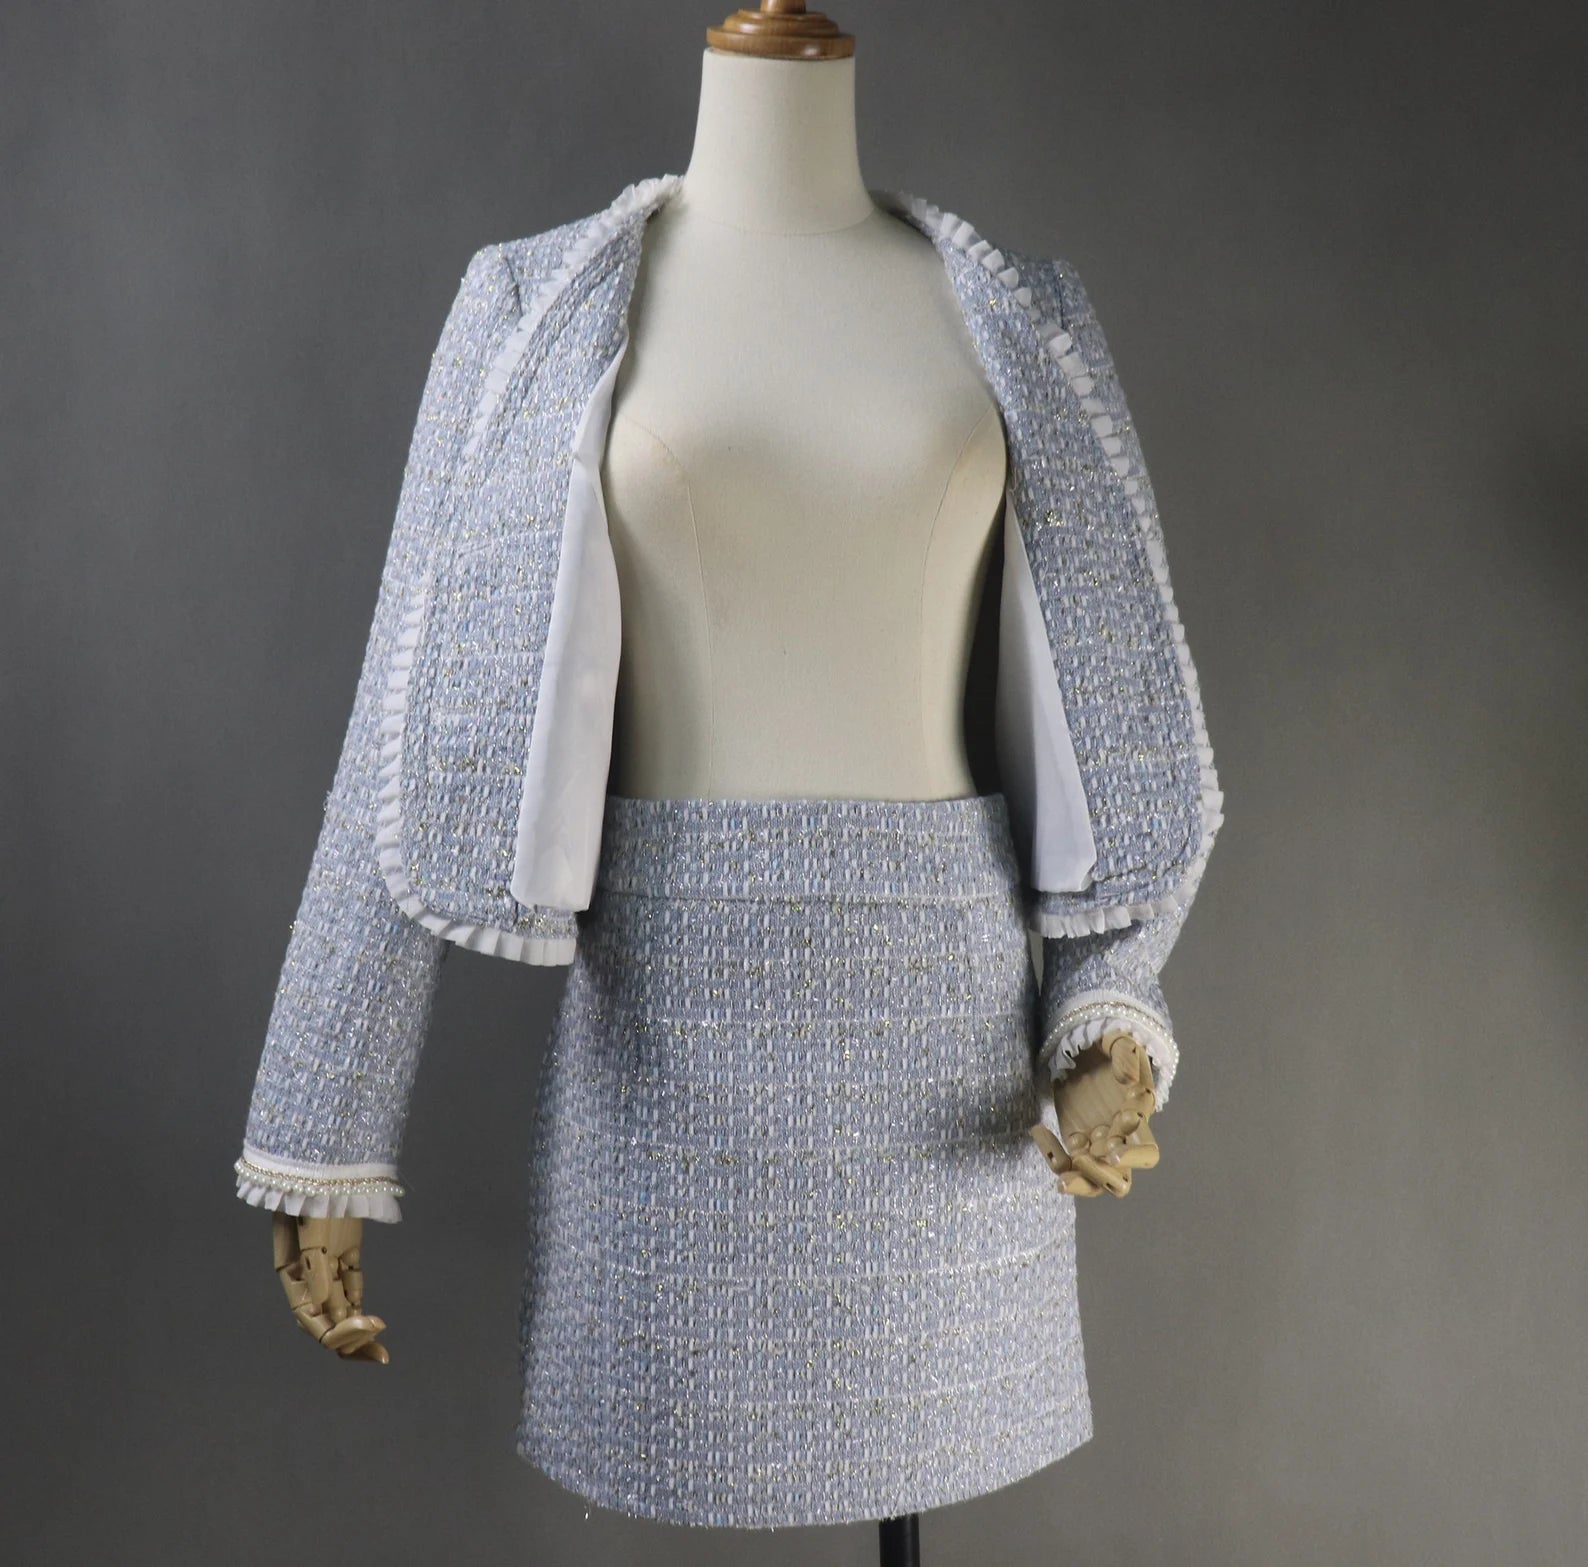 Ladies Blue Hand Made Custom Made Pearl Ruffle Trim Tweed Blazer + Skirt / Shorts Suit (10% discount)  "More Than 10% Additional Discount when you buy both  Jacket  +Skirt or Jacket + Shorts"   UK CUSTOMER SERVICE! Women Custom  Blue Hand Made Custom Made Pearl Ruffle Trim Tweed Blazer + Skirt / Shorts Suit (more than 10% discount) - It is critical that you know your waist ,hip and bust measurements; please do not guess your size based on other clothes you wear.